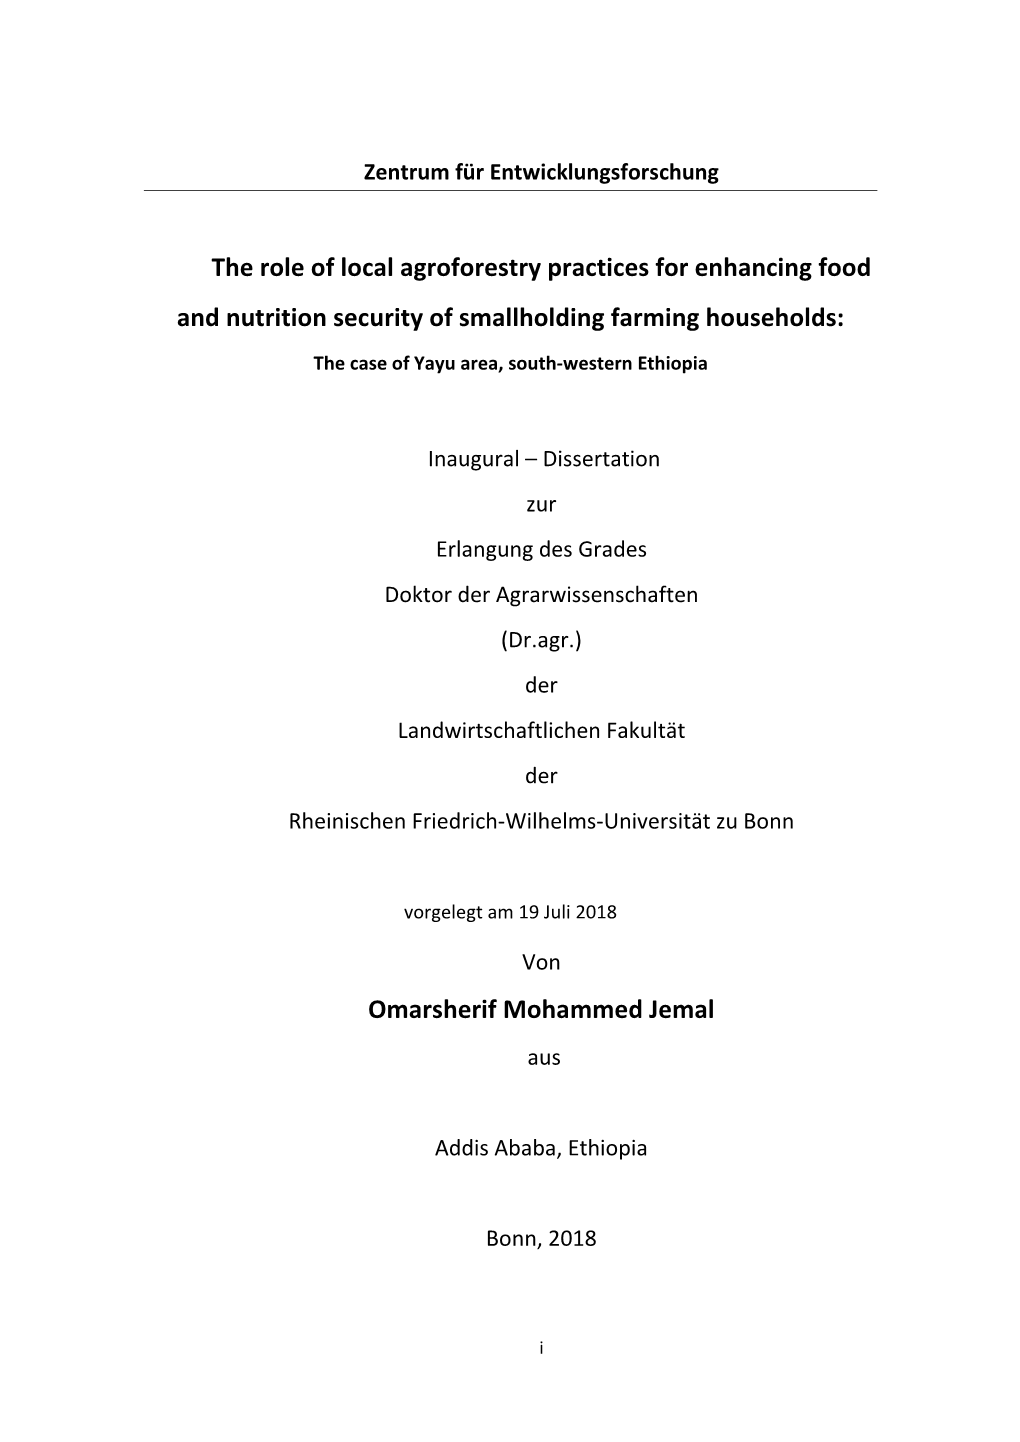 The Role of Local Agroforestry Practices for Enhancing Food and Nutrition Security of Smallholding Farming Households